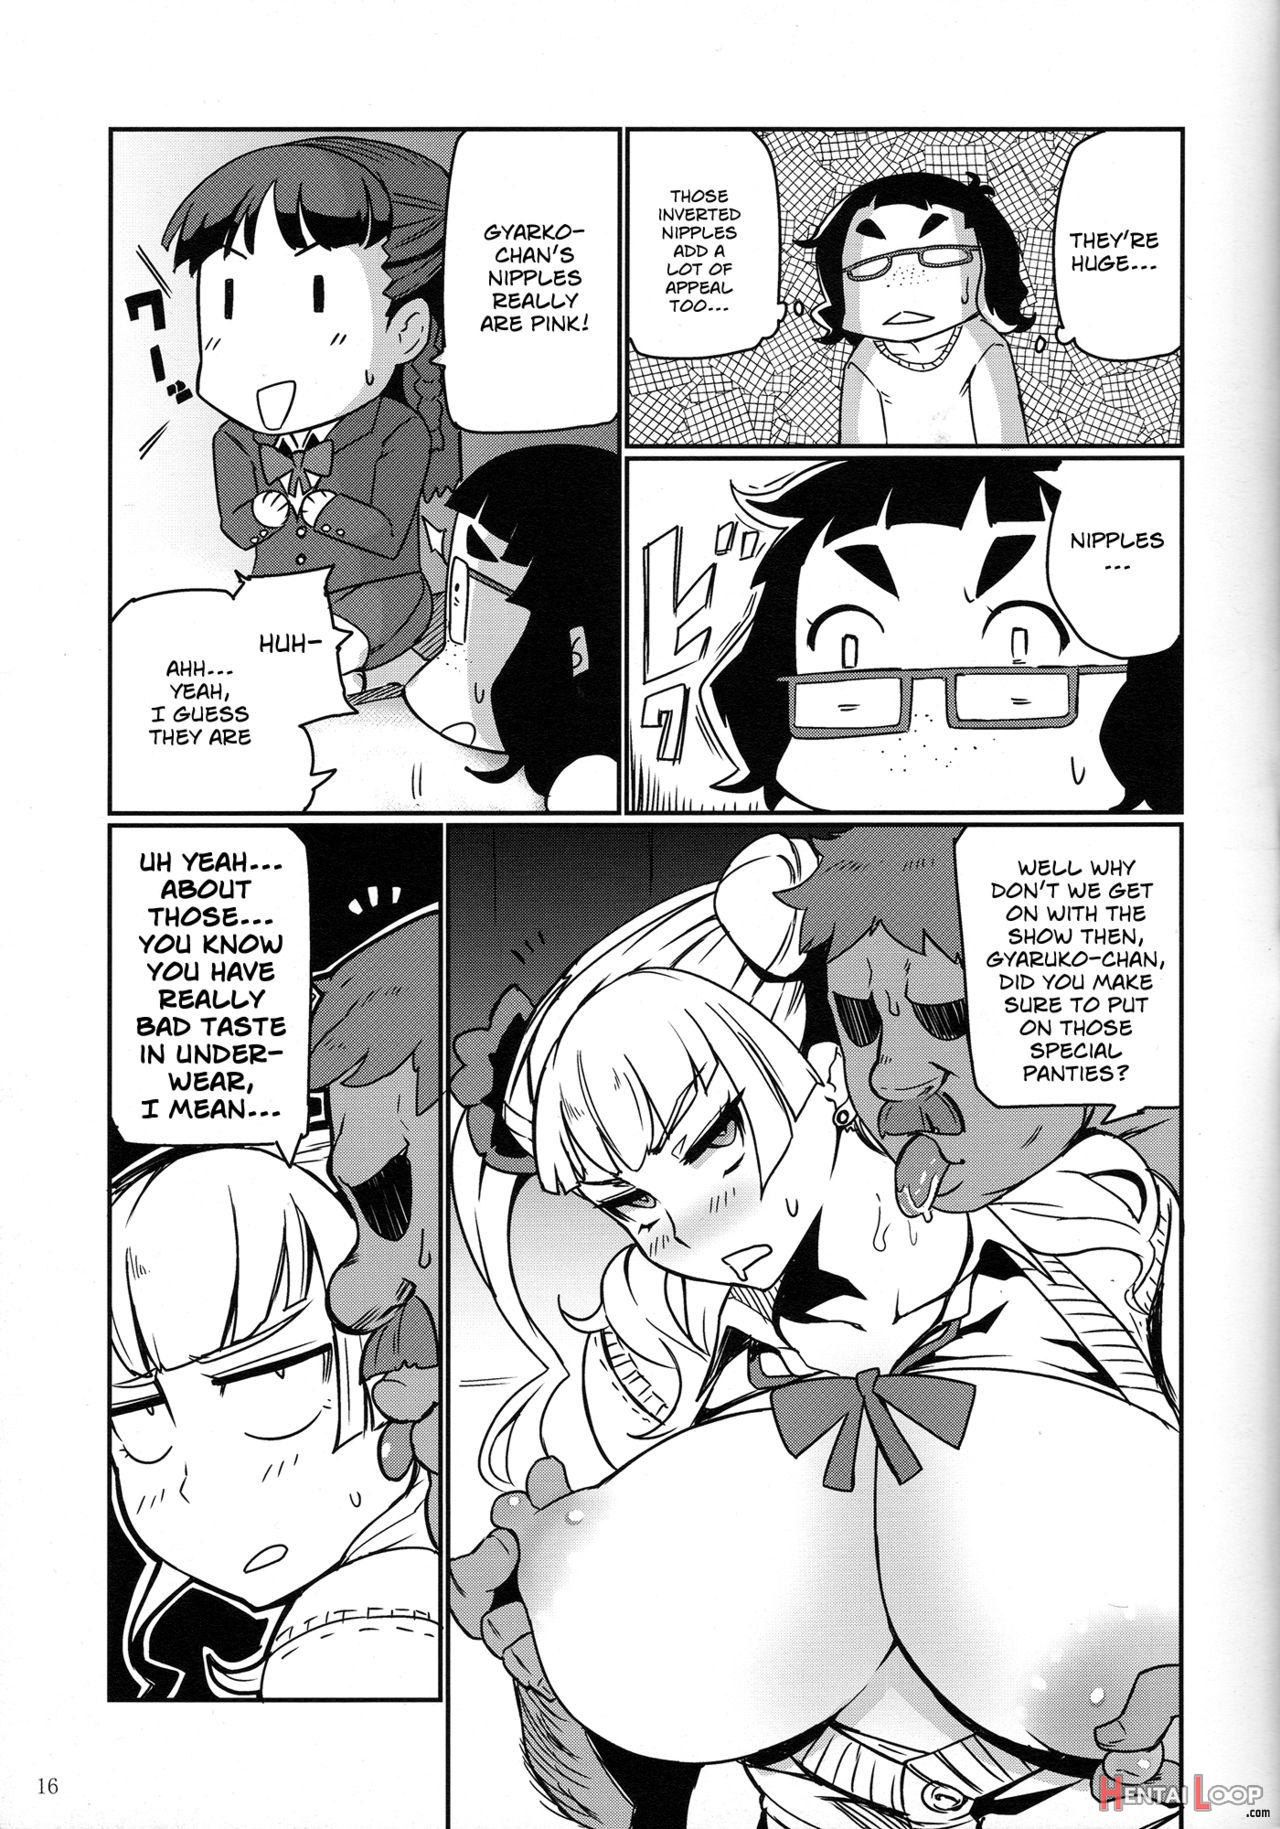 Galko Ah! page 14